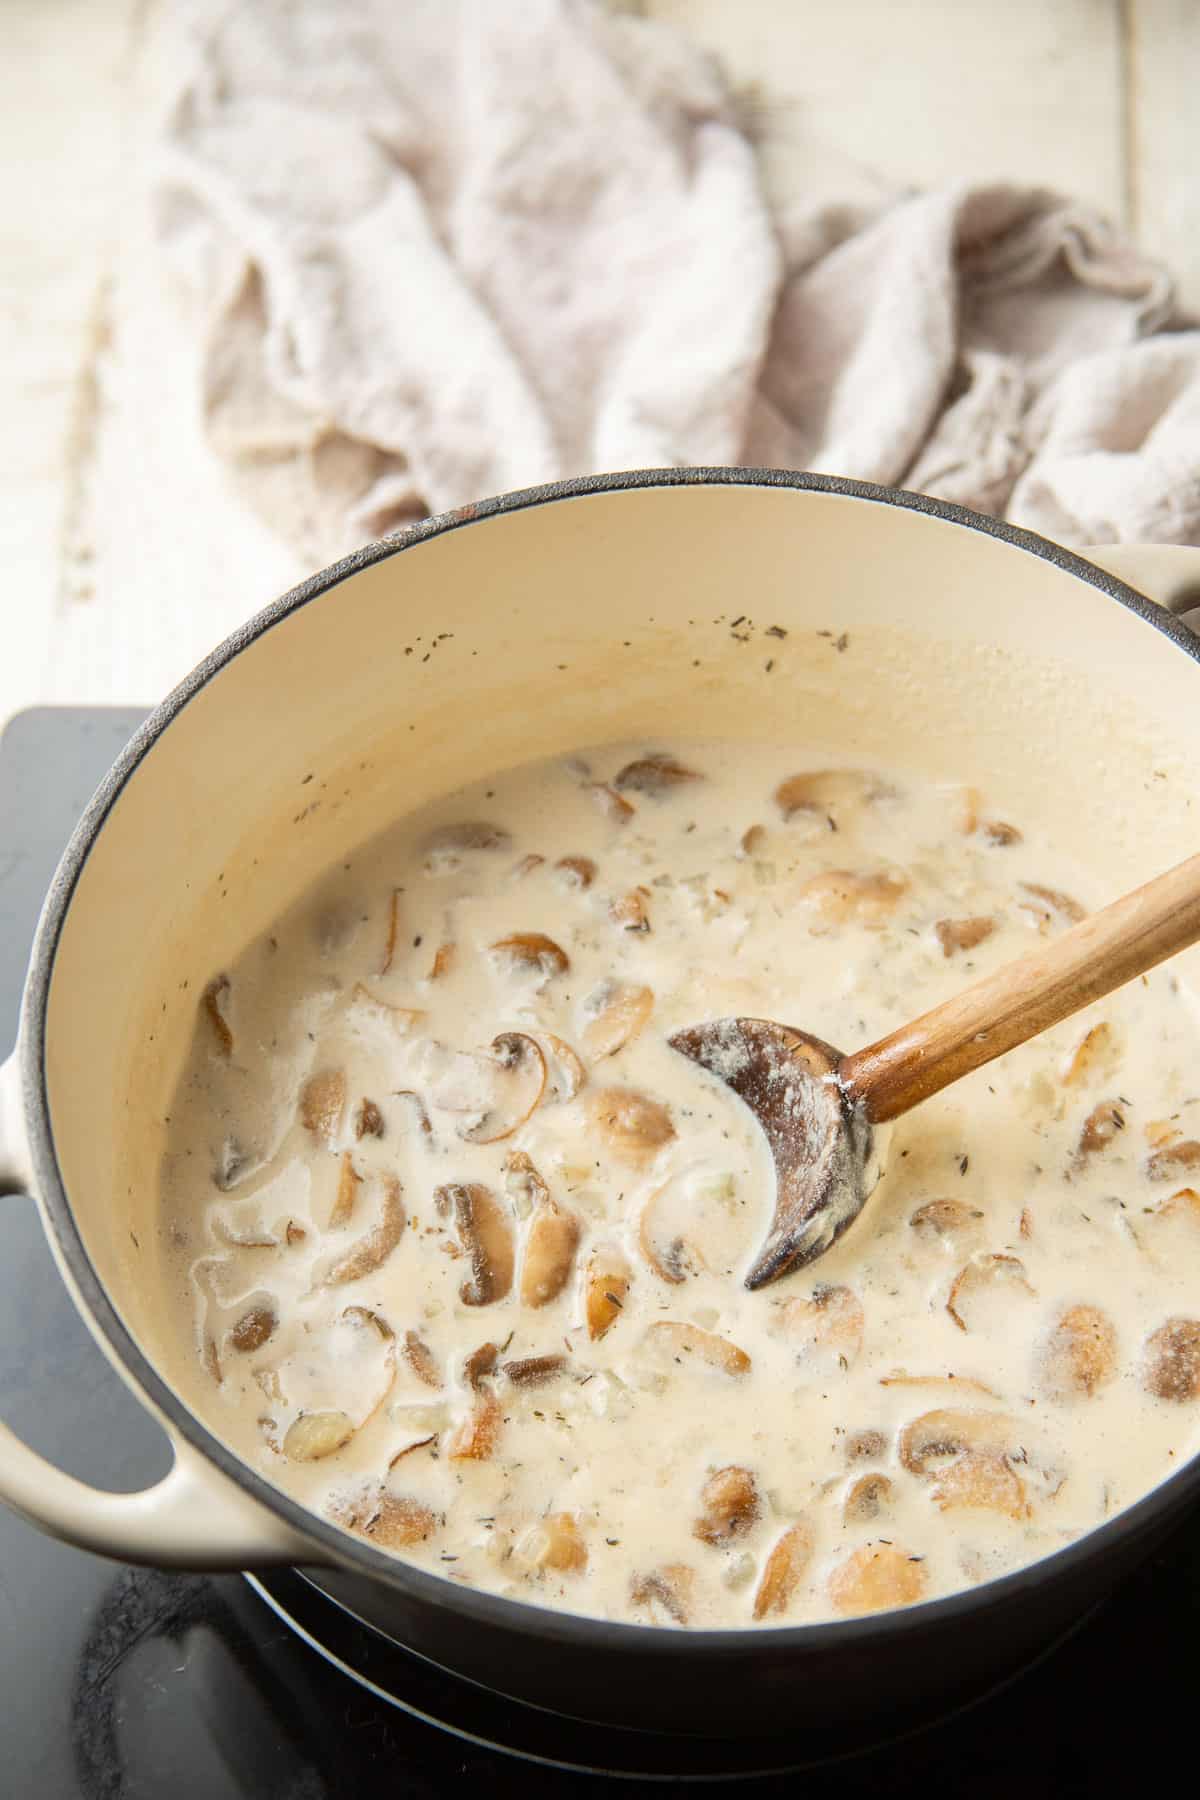 Creamy mushroom sauce cooking in a pot with wooden spoon.